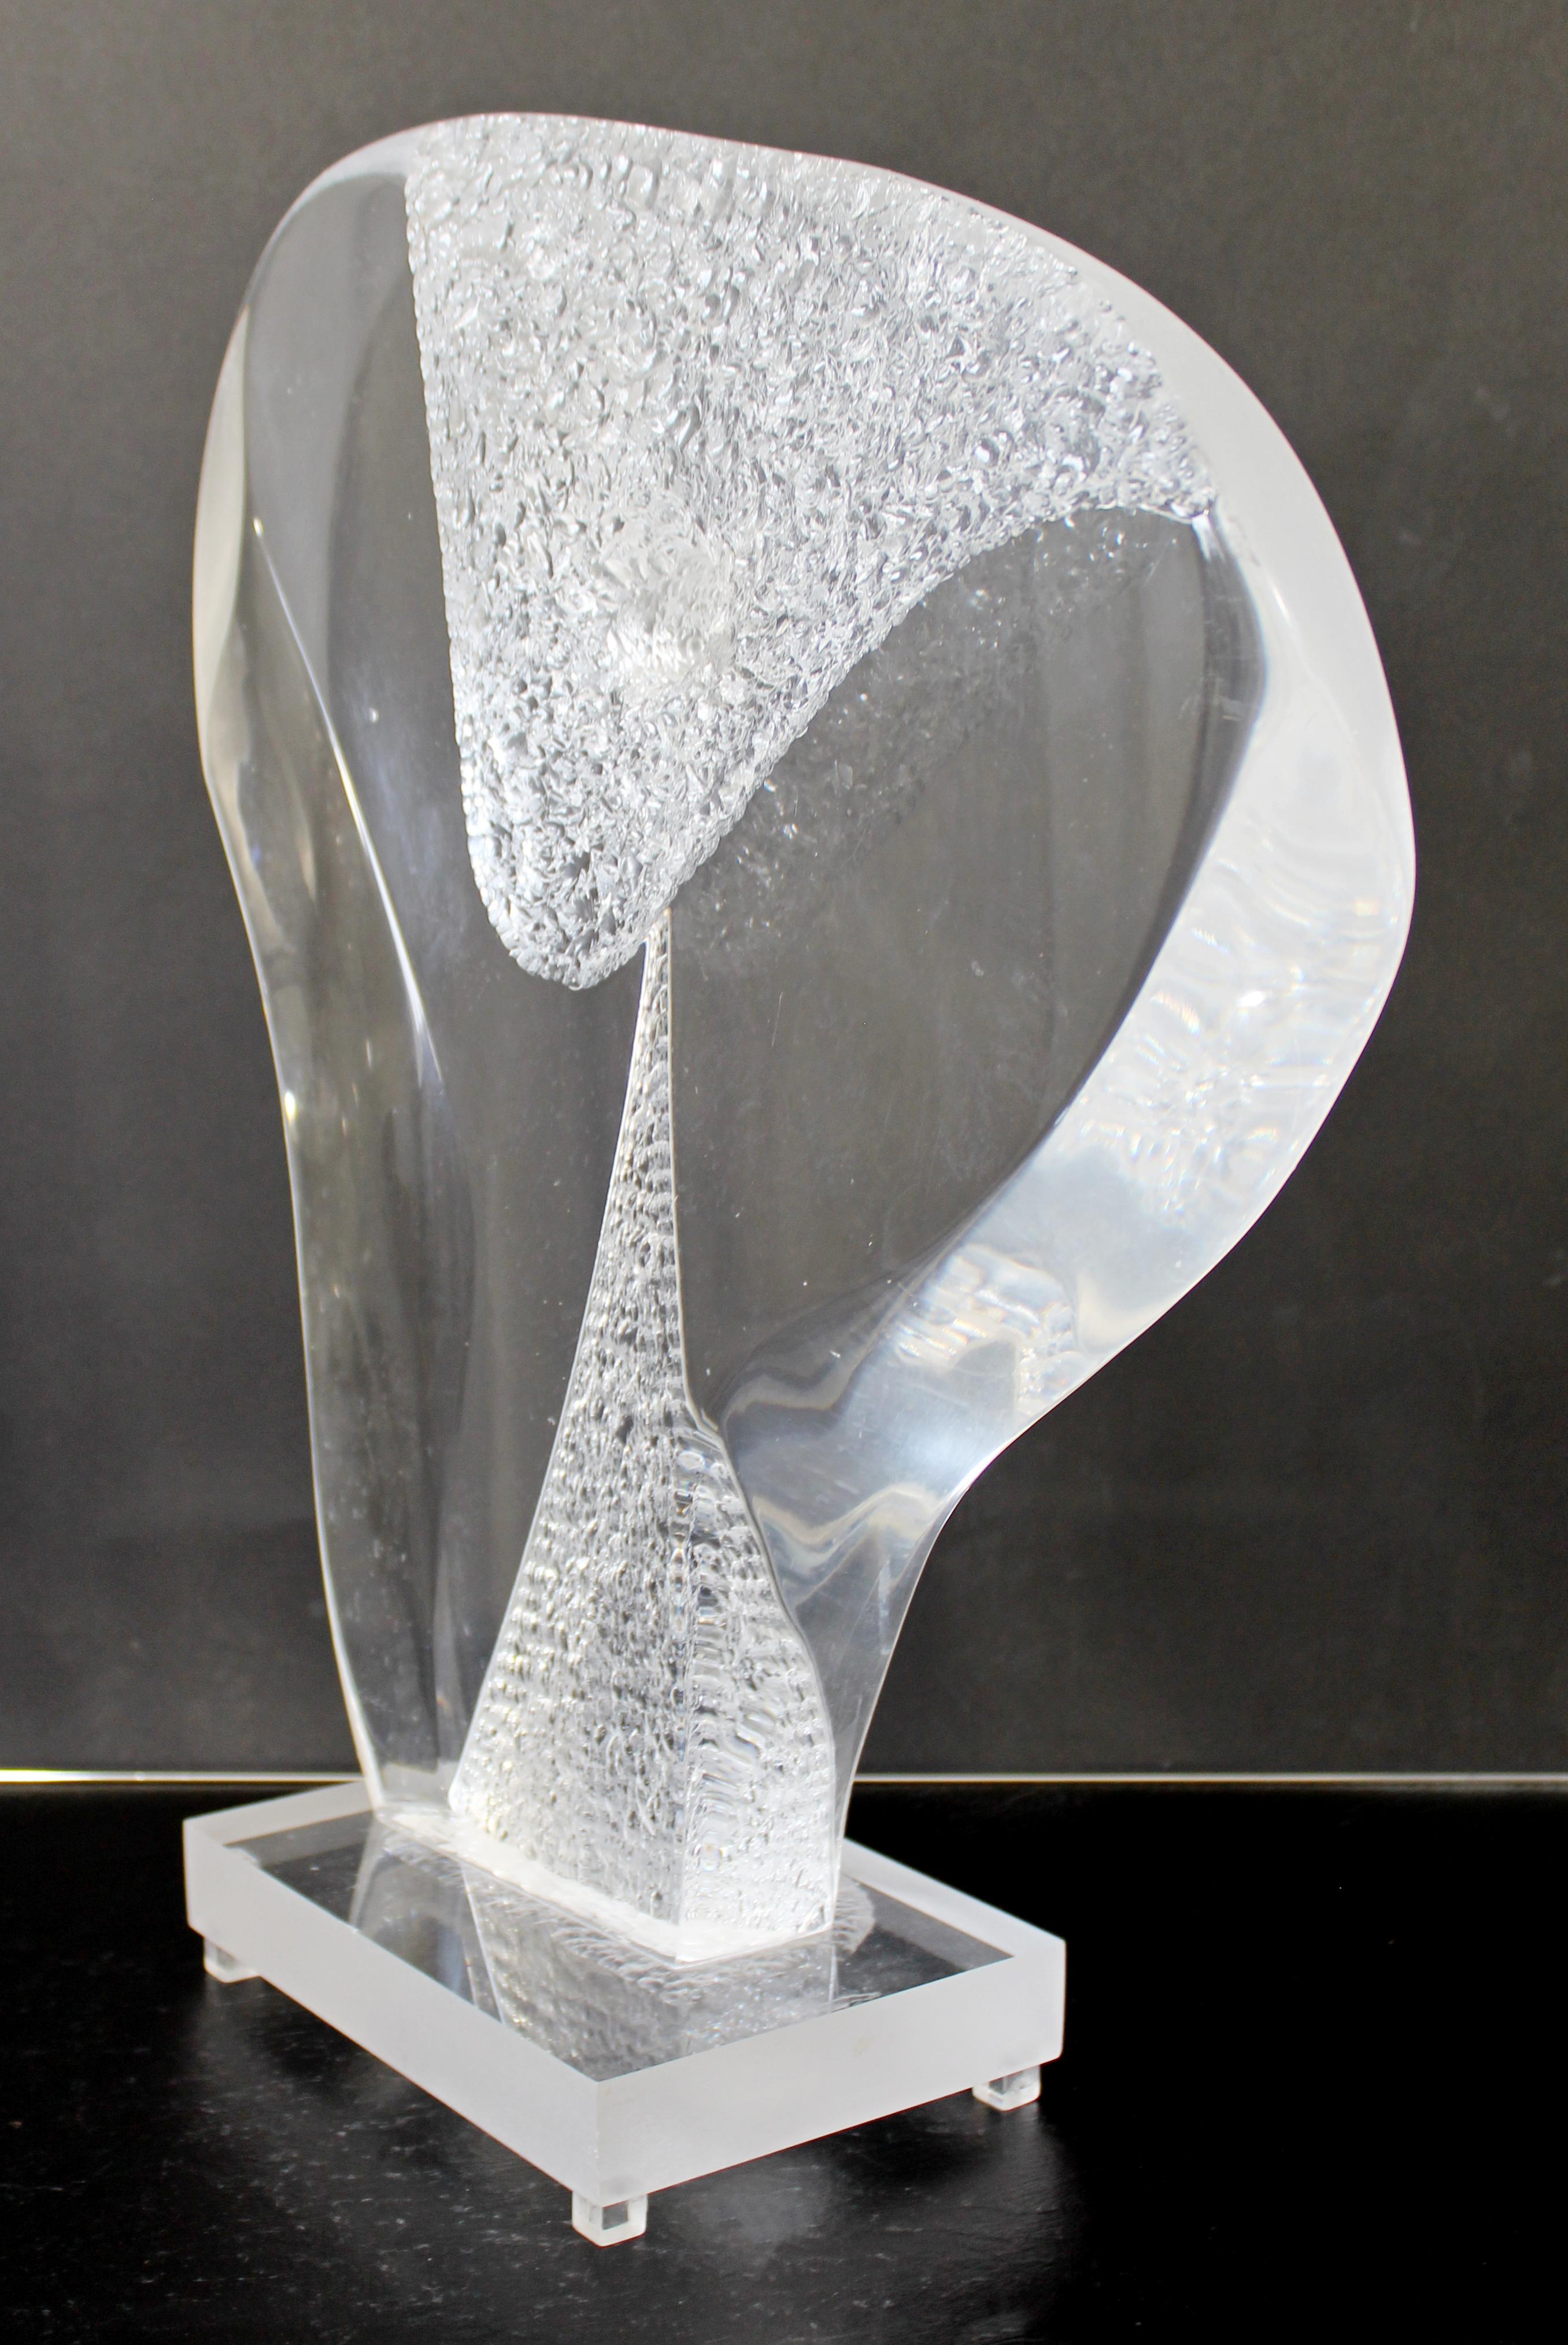 For your consideration is a sensational, abstract lucite acrylic table sculpture, titled 